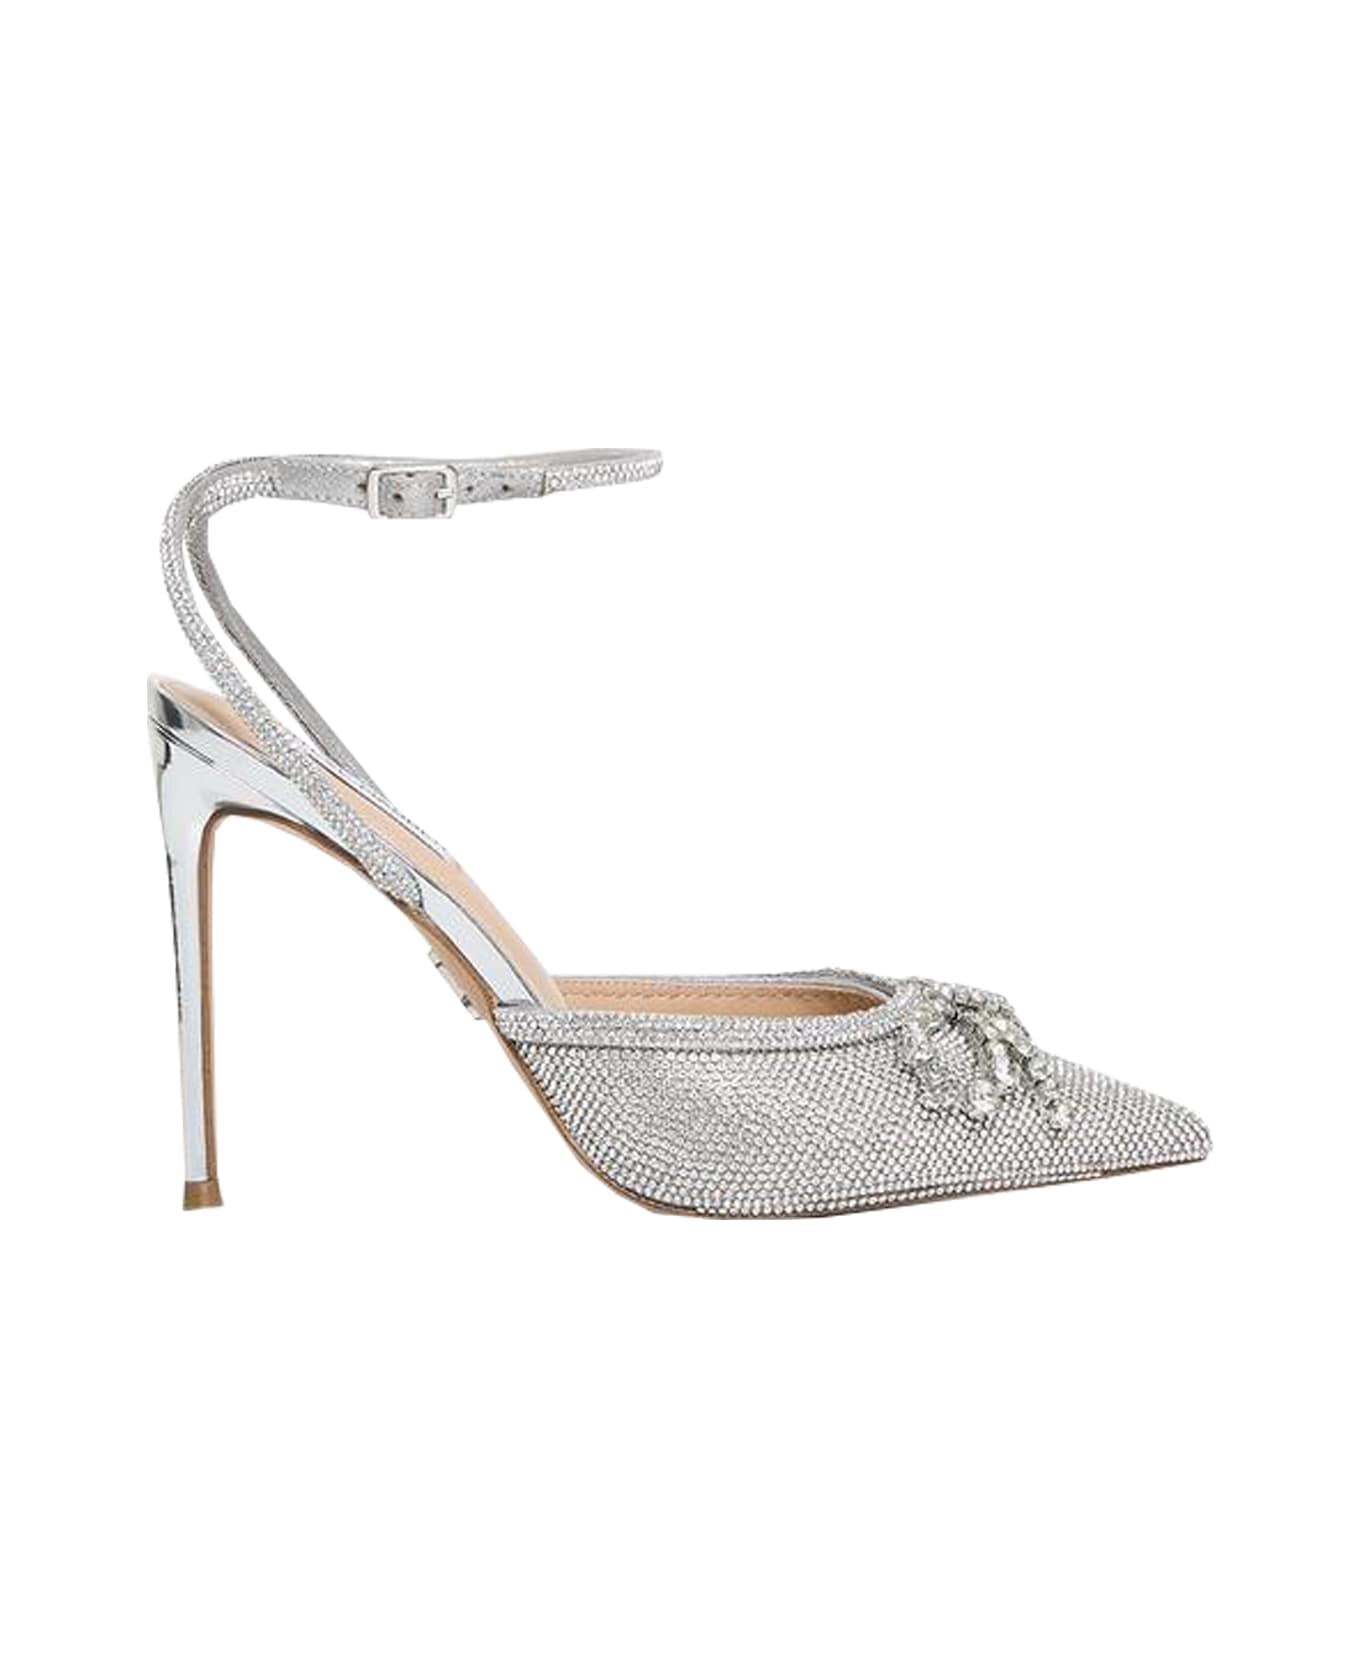 Steve Madden Shoes With Heel - Silver